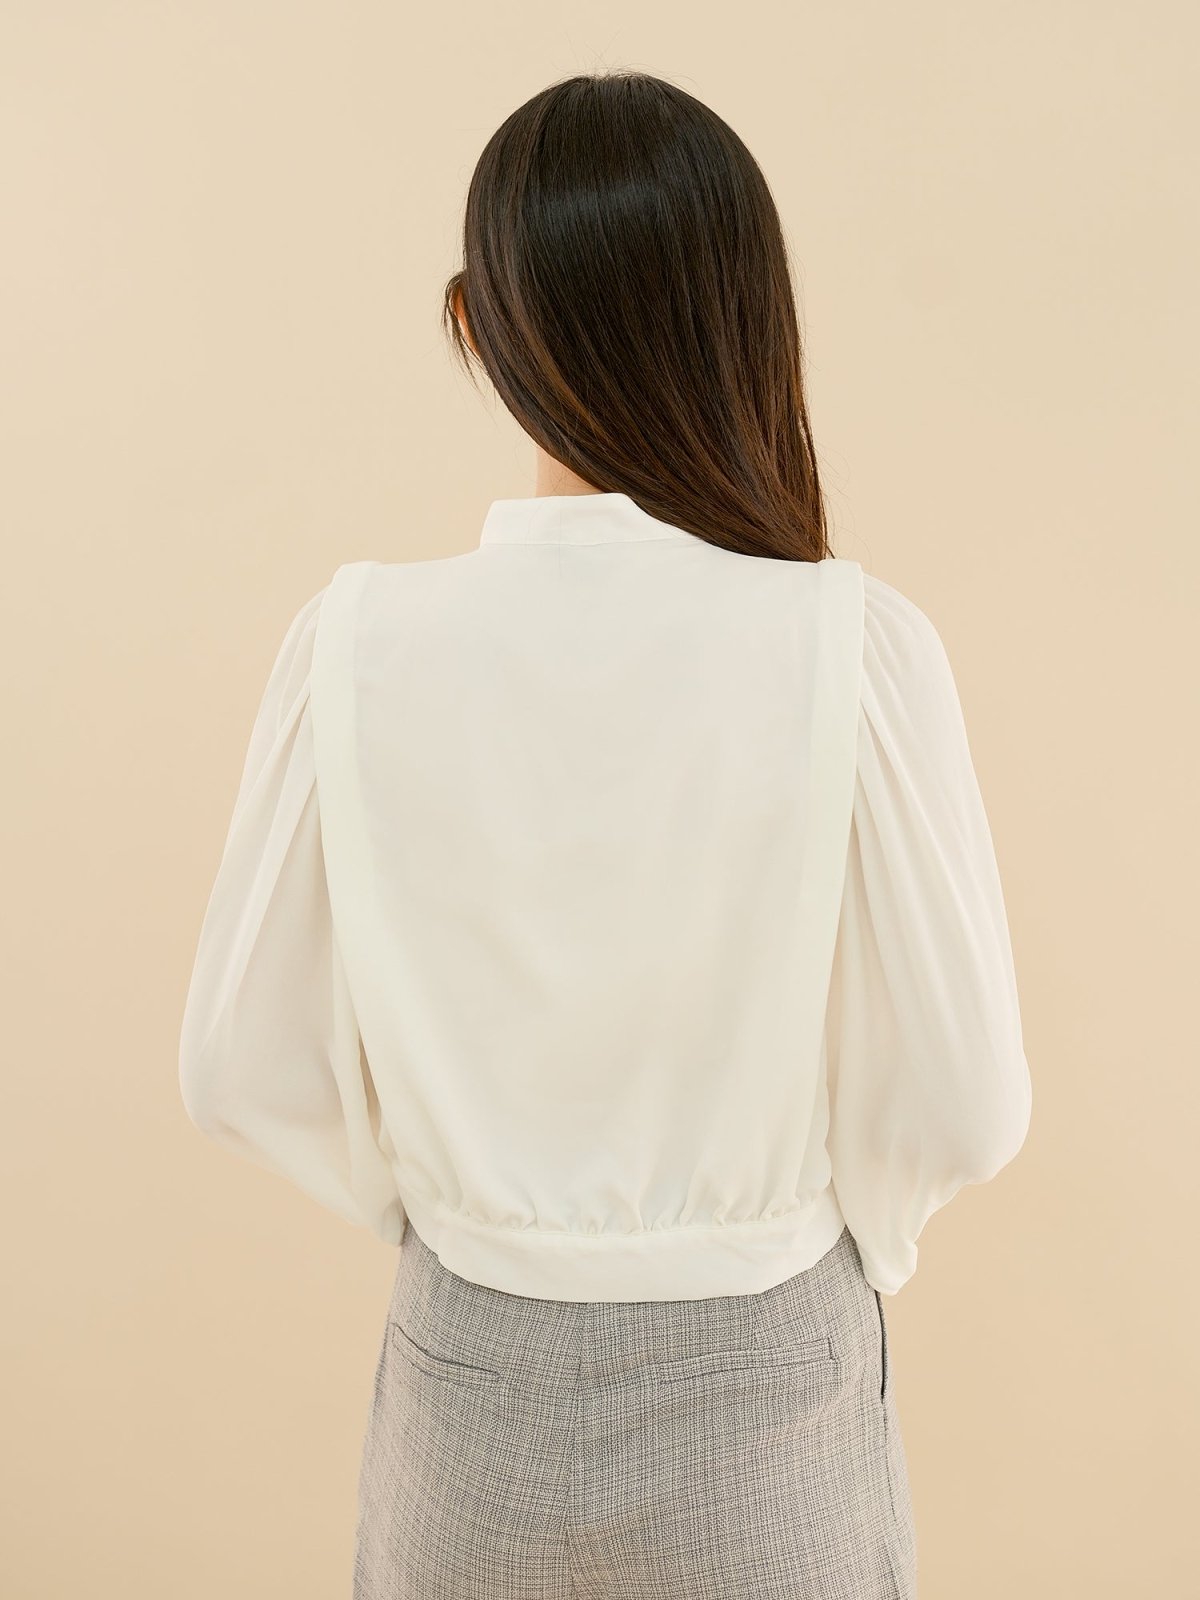 Cropped Button Up Blouse IVORY - DAG-DD7844-21IvoryXS - Marshmallow White - XS - D'ZAGE Designs